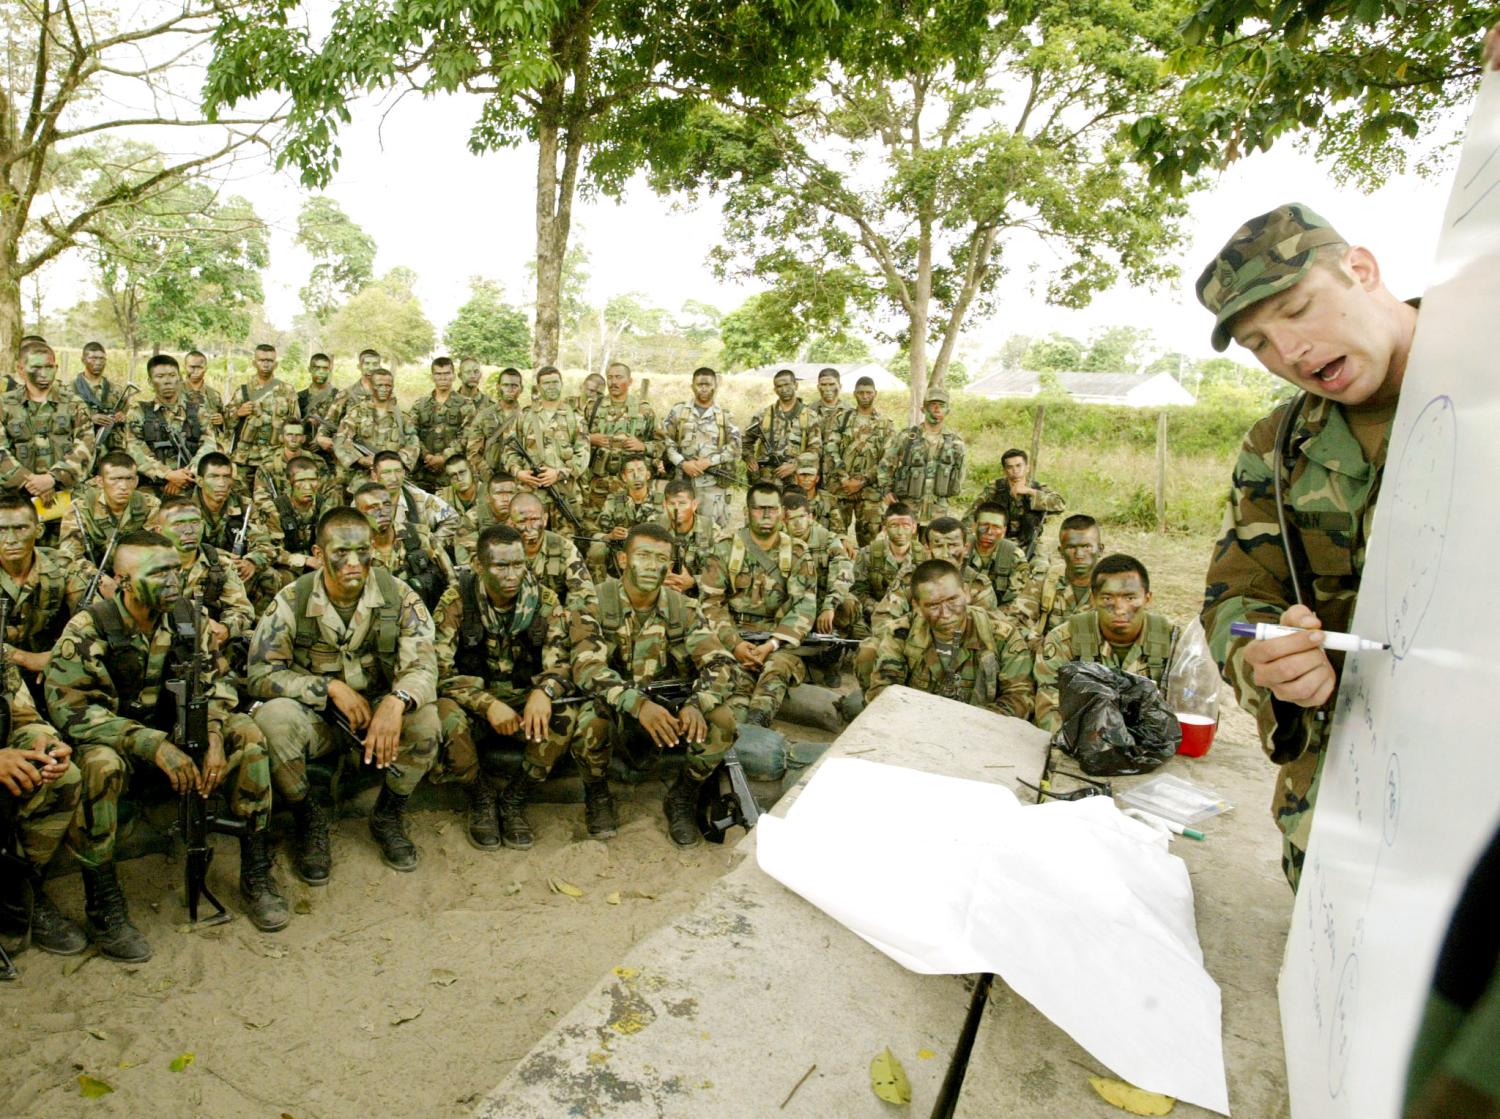 A U.S. Special Forces soldier talks to Colombian soldiers at a militarybase during training in Saravena, Arauca province, February 7, 2003. Atleast 70 U.S. soldiers are in Saravena training Colombian army troopsto combat leftist rebels. REUTERS/Eliana AponteEA/ME - RP3DRINWHOAA